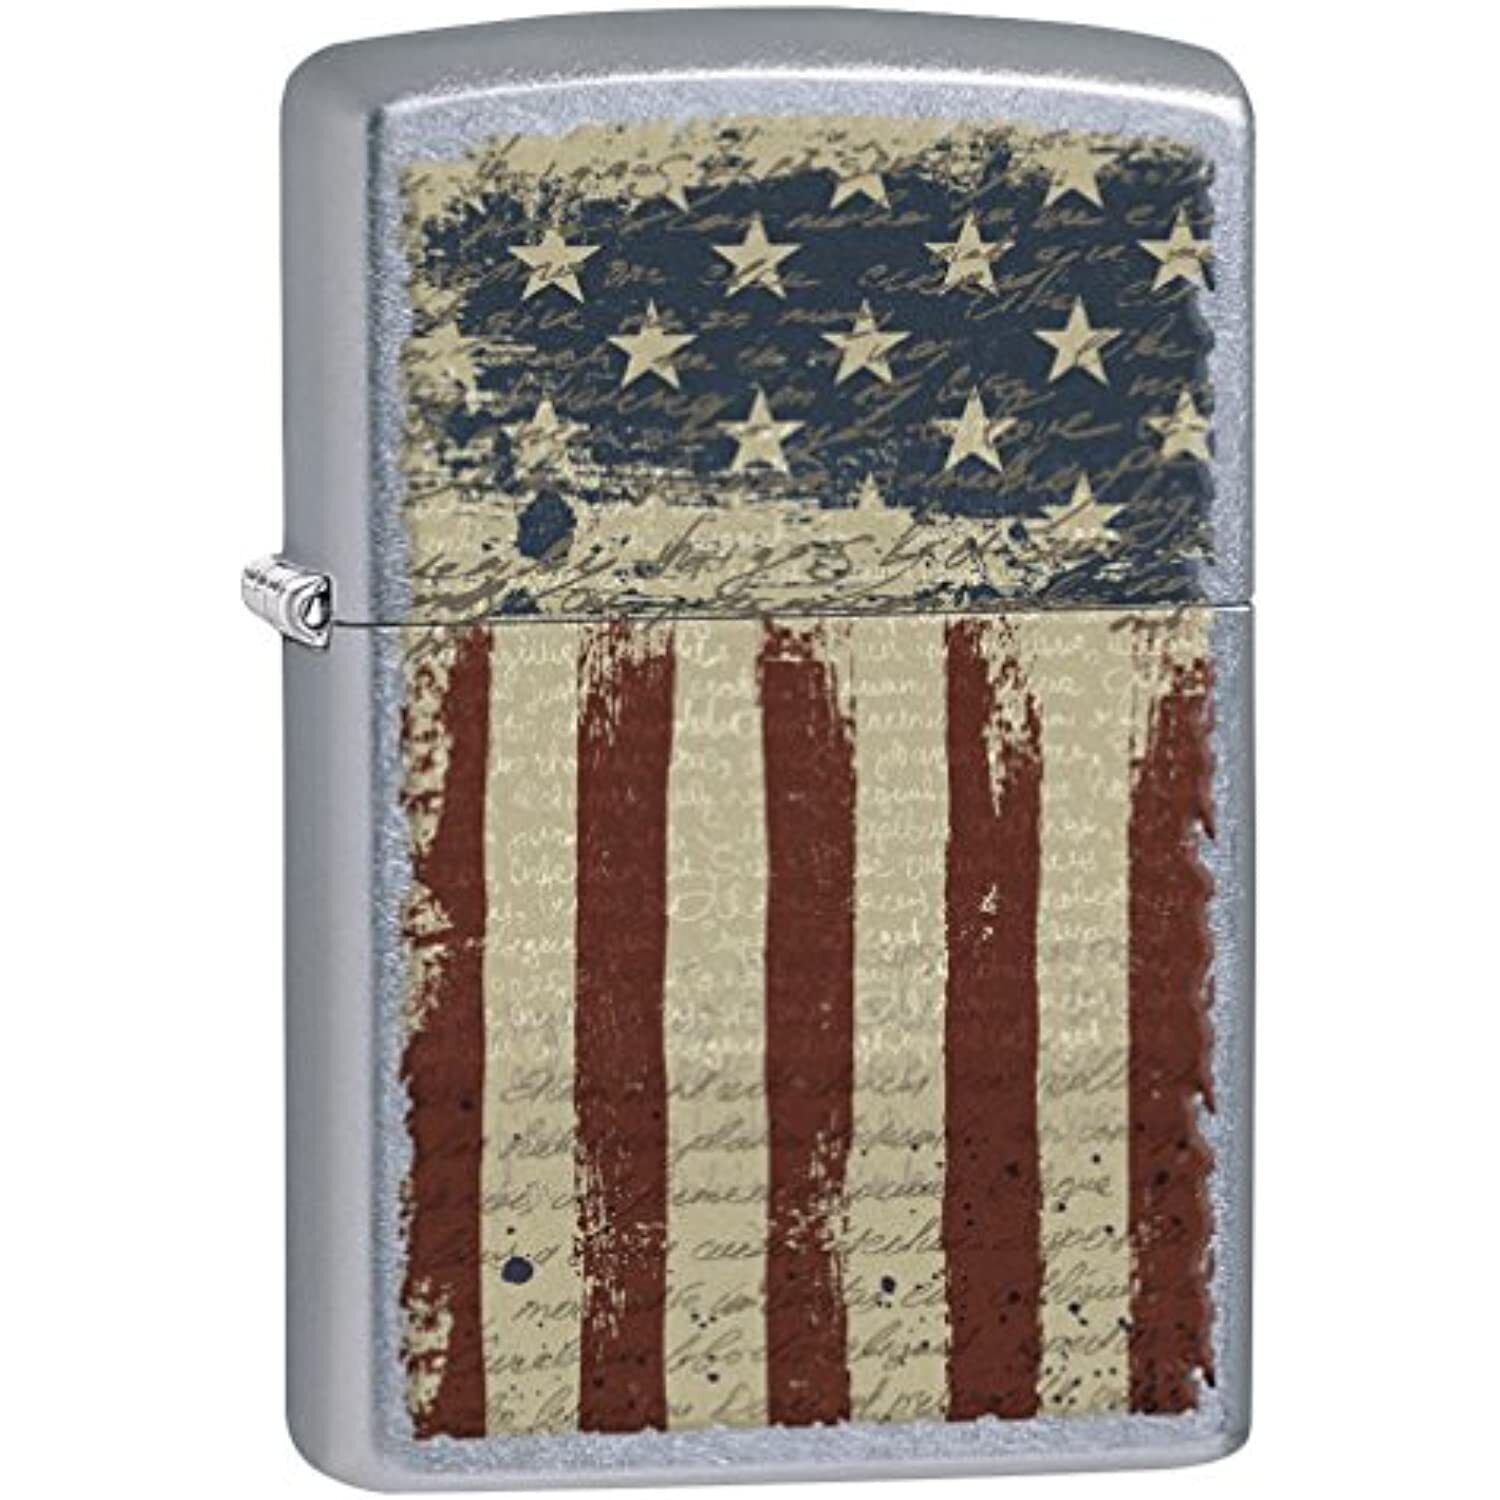 Zippo Lighter: Aged American Flag - Street Chrome 77091. Available Now for 18.53